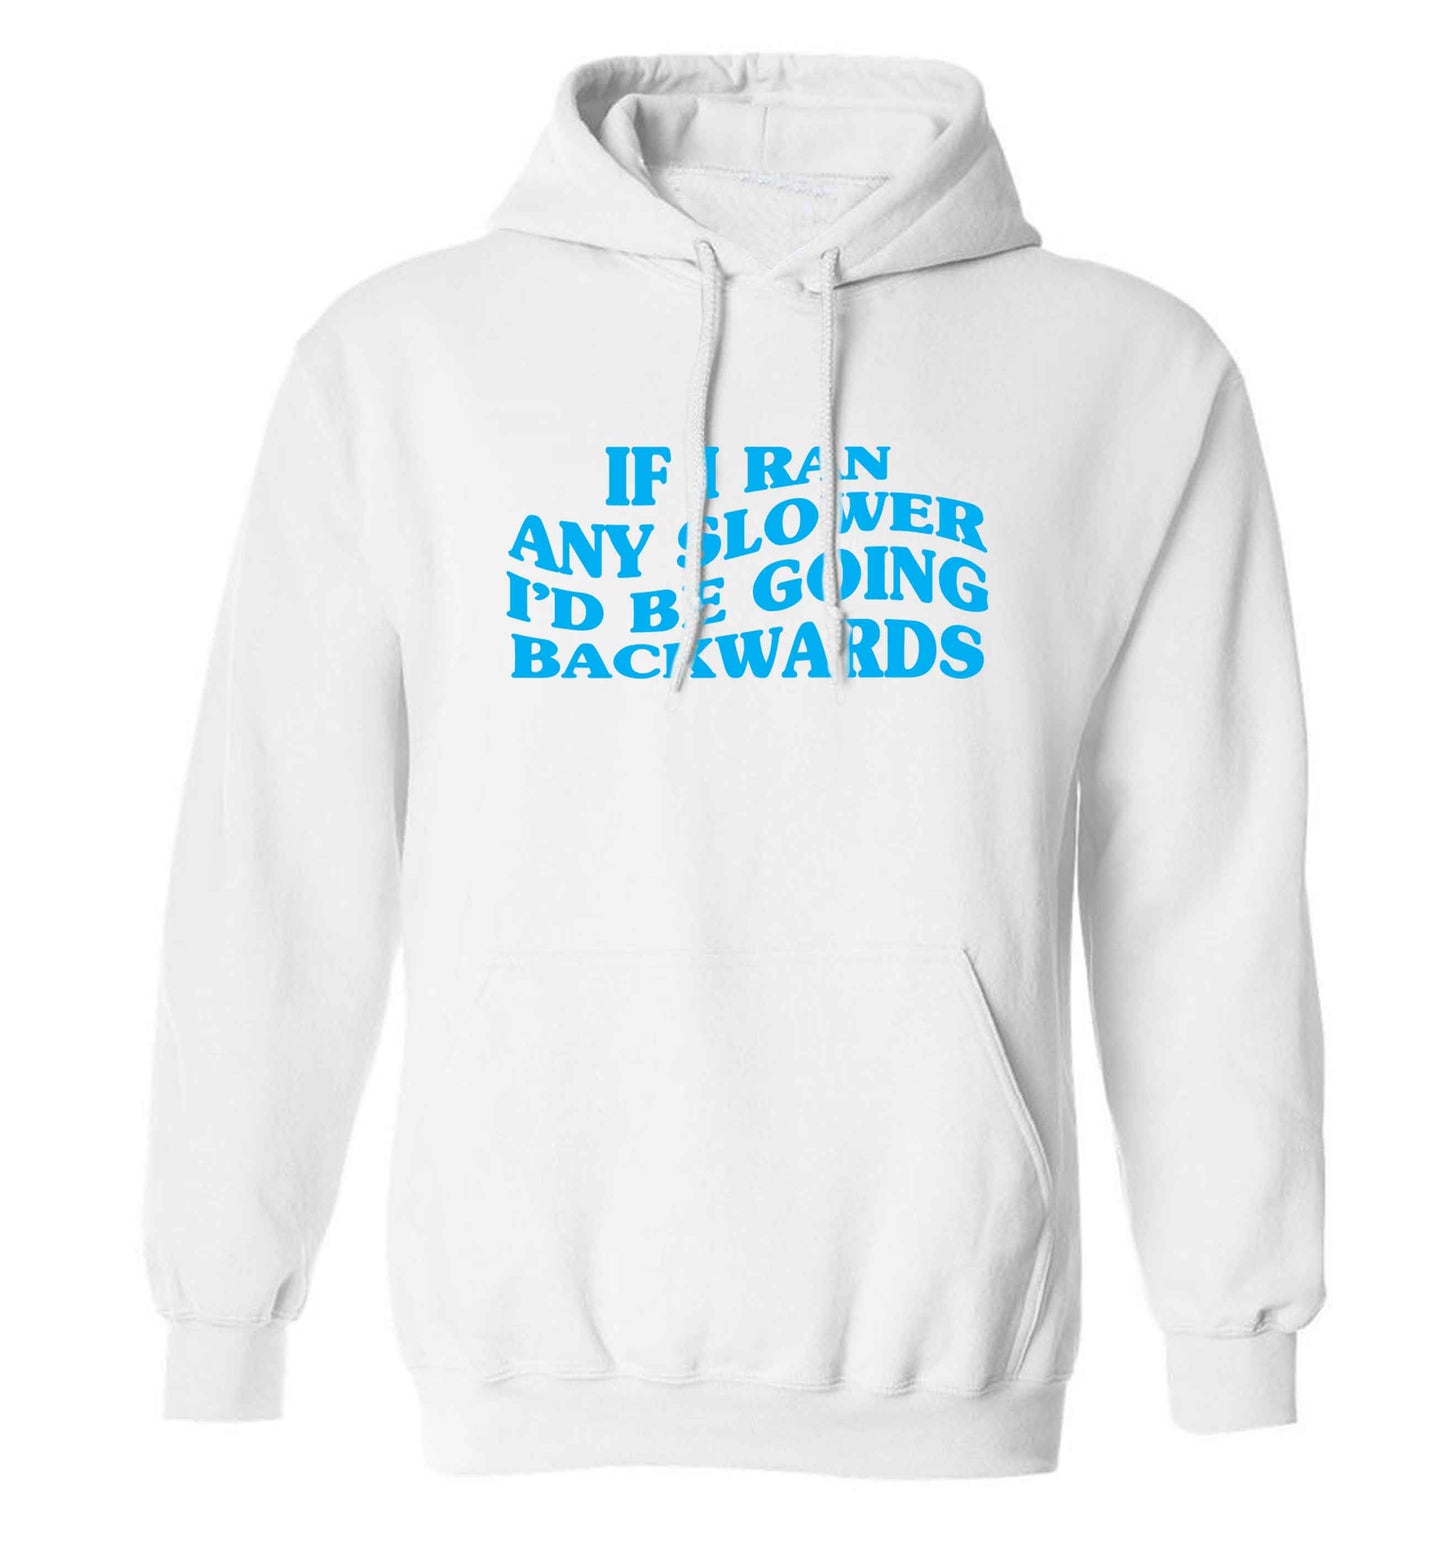 If I ran any slower I'd be going backwards adults unisex white hoodie 2XL